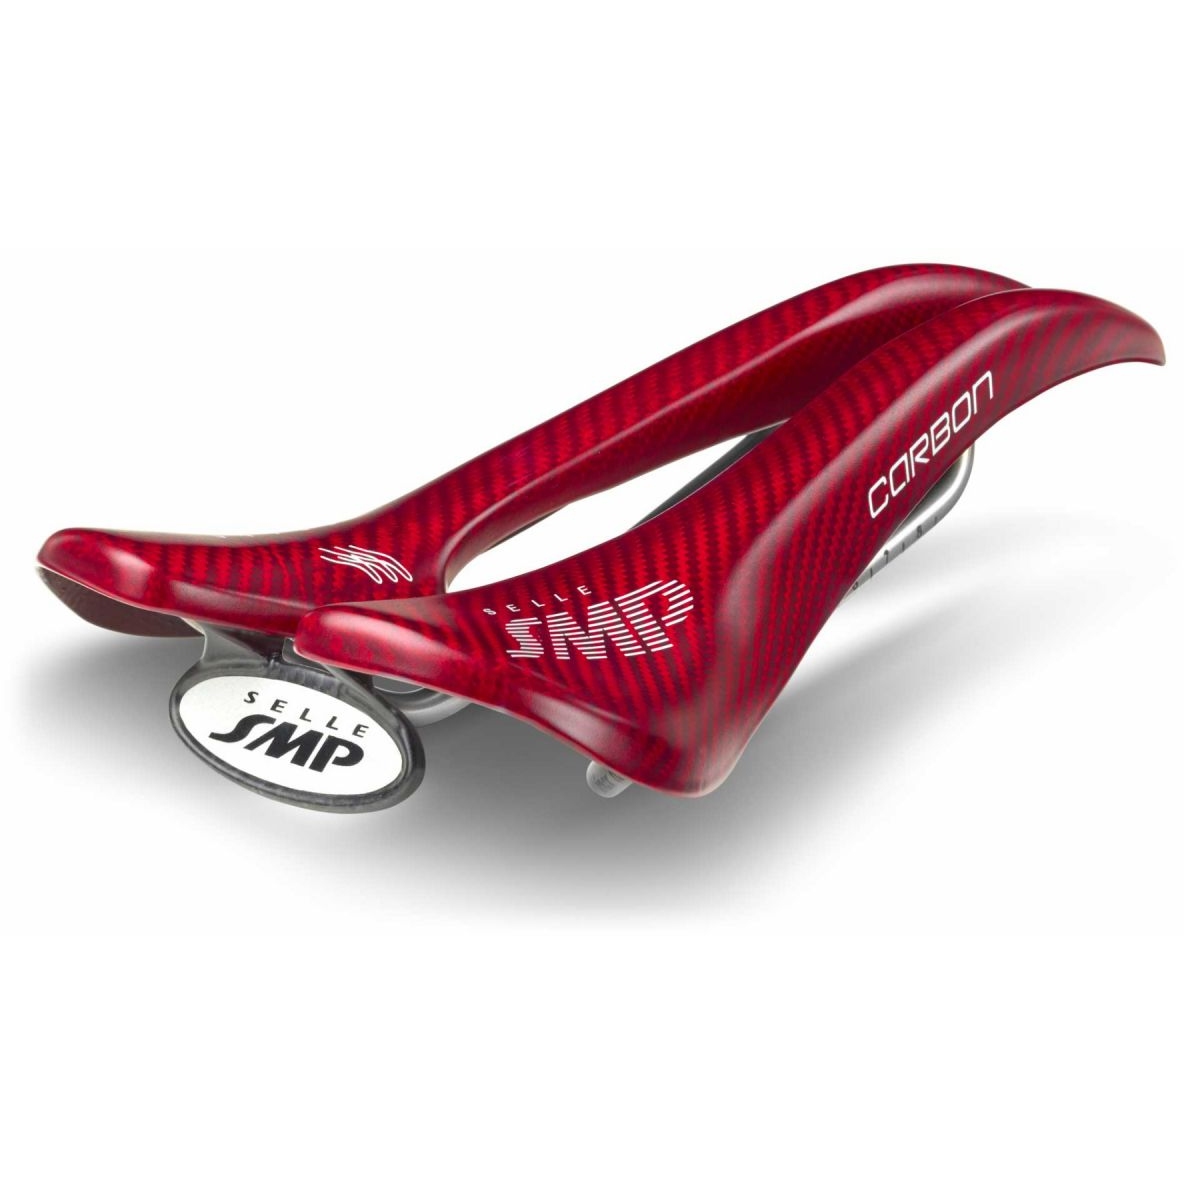 Picture of Selle SMP Carbon Saddle - red